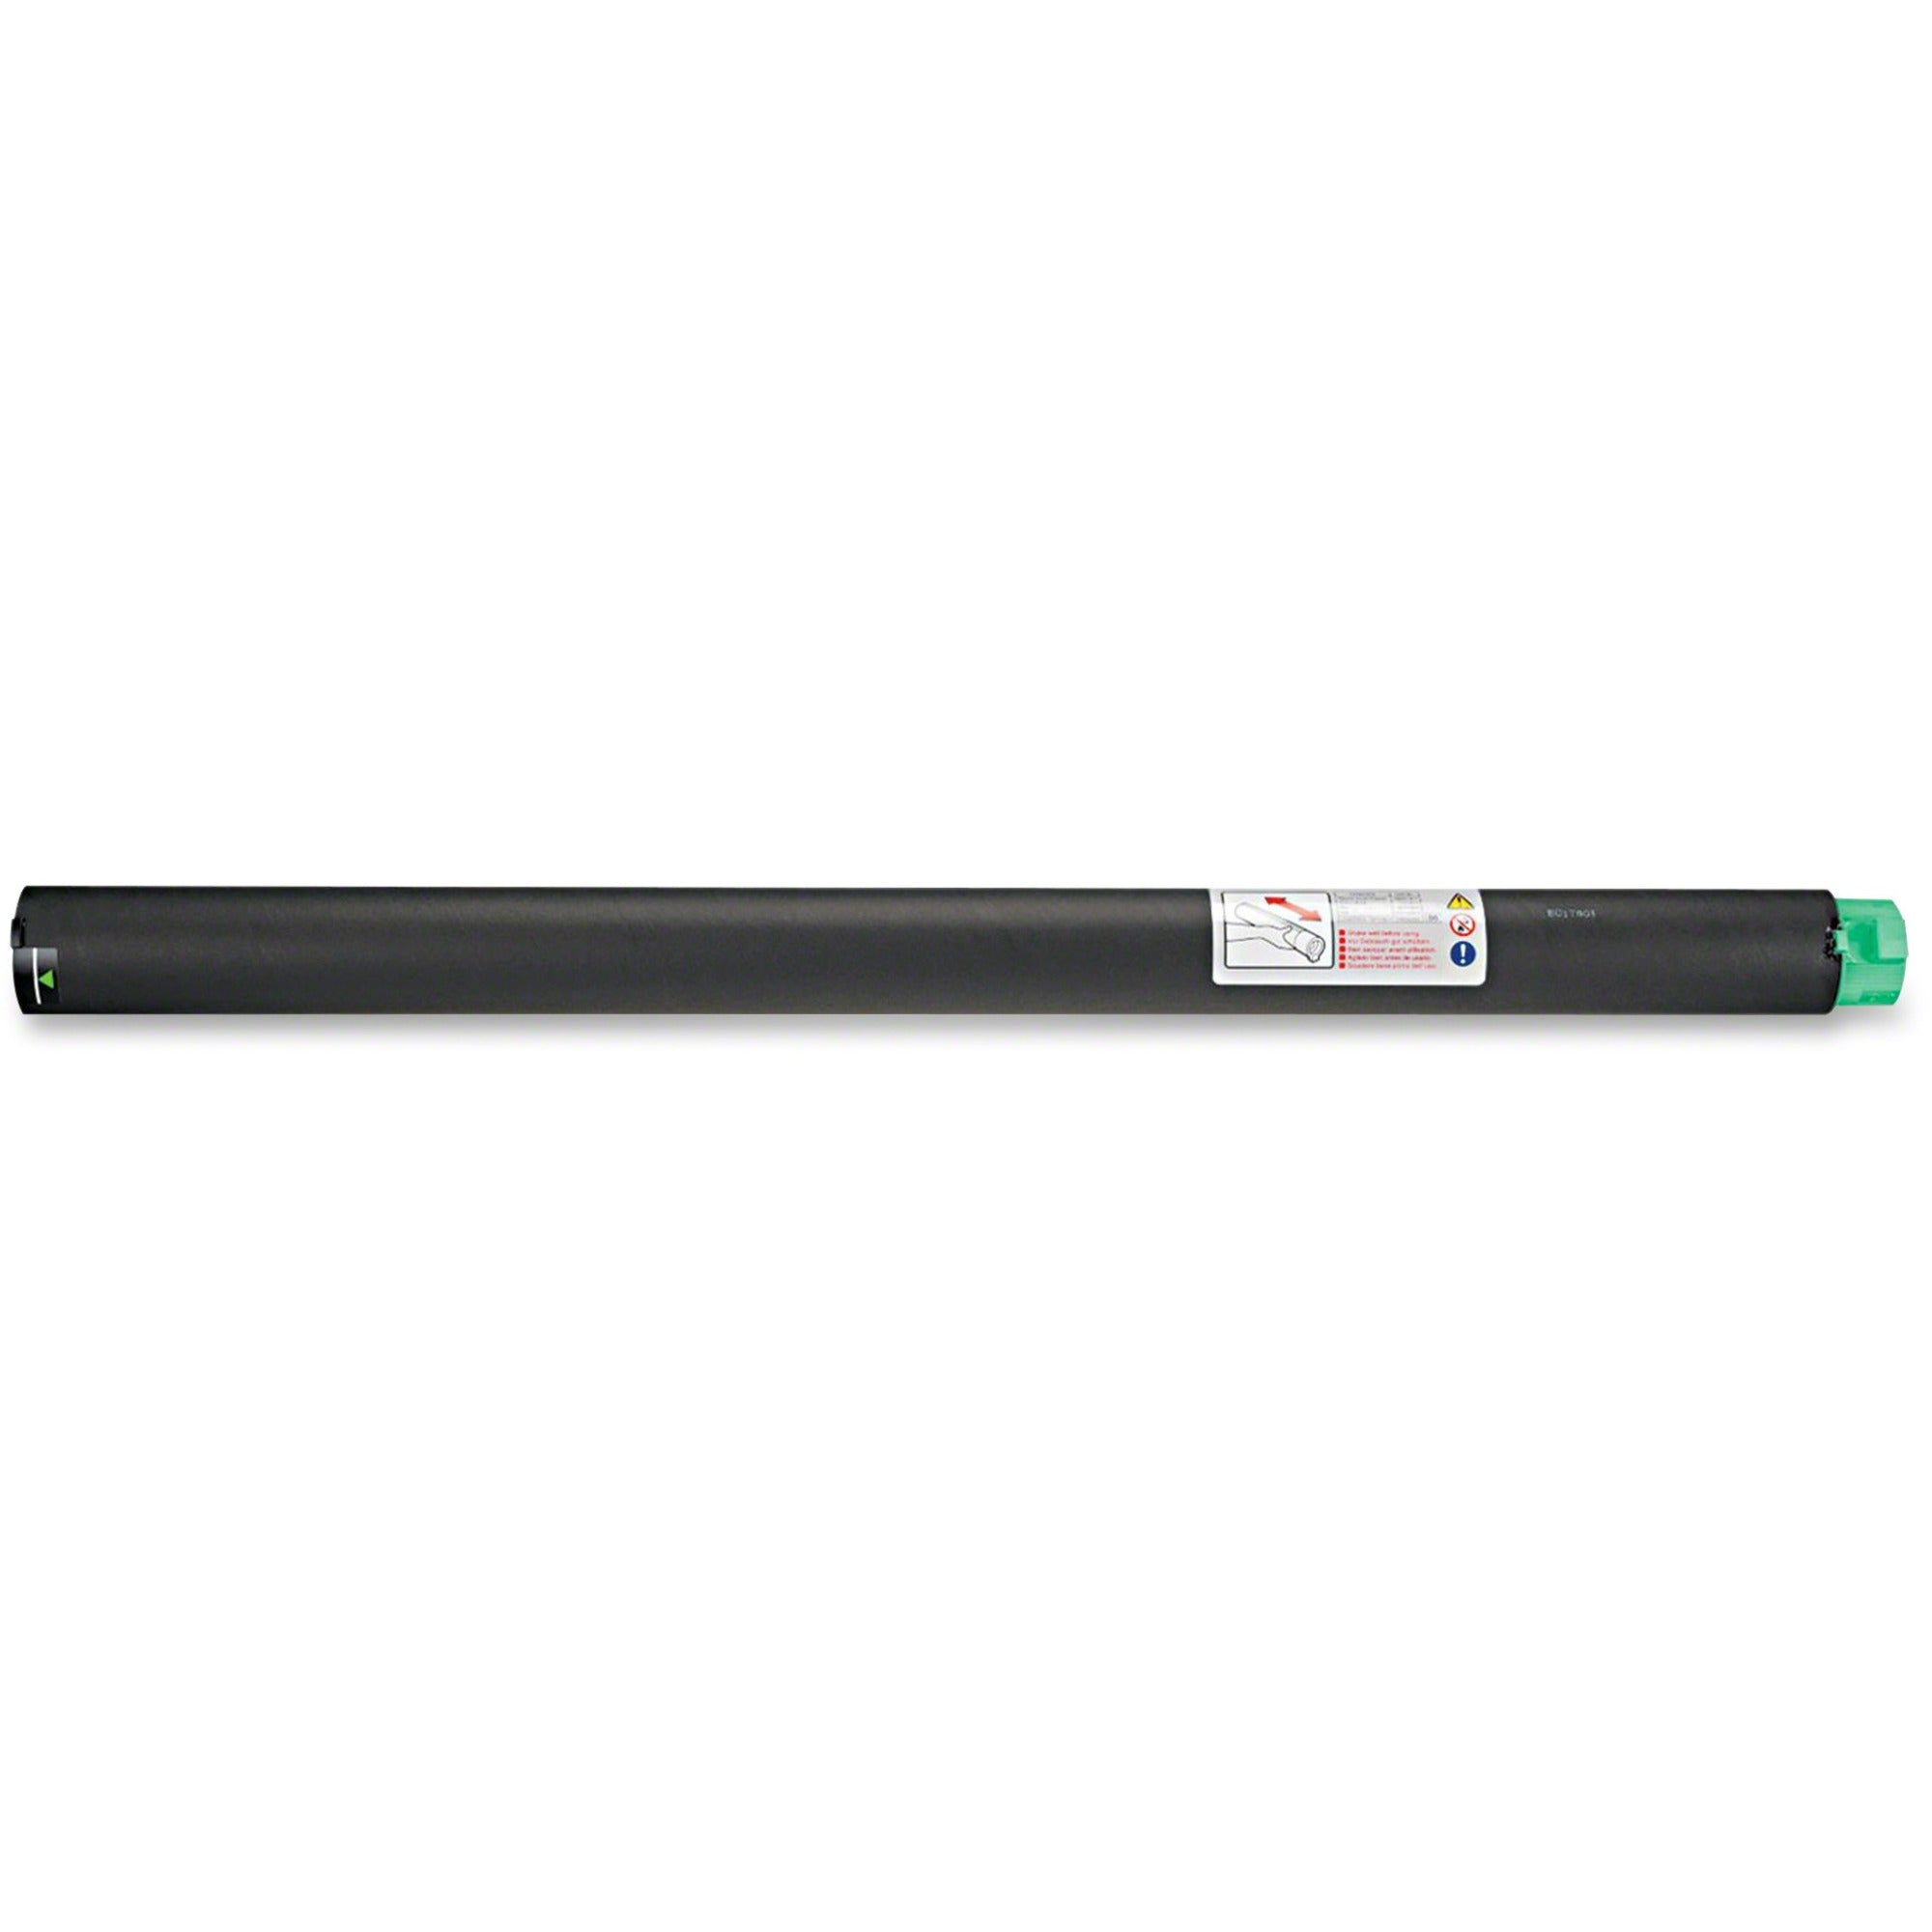 Ricoh Toner Cartridge - Laser - High Yield - 2200 Pages - Black - 1 Each - 